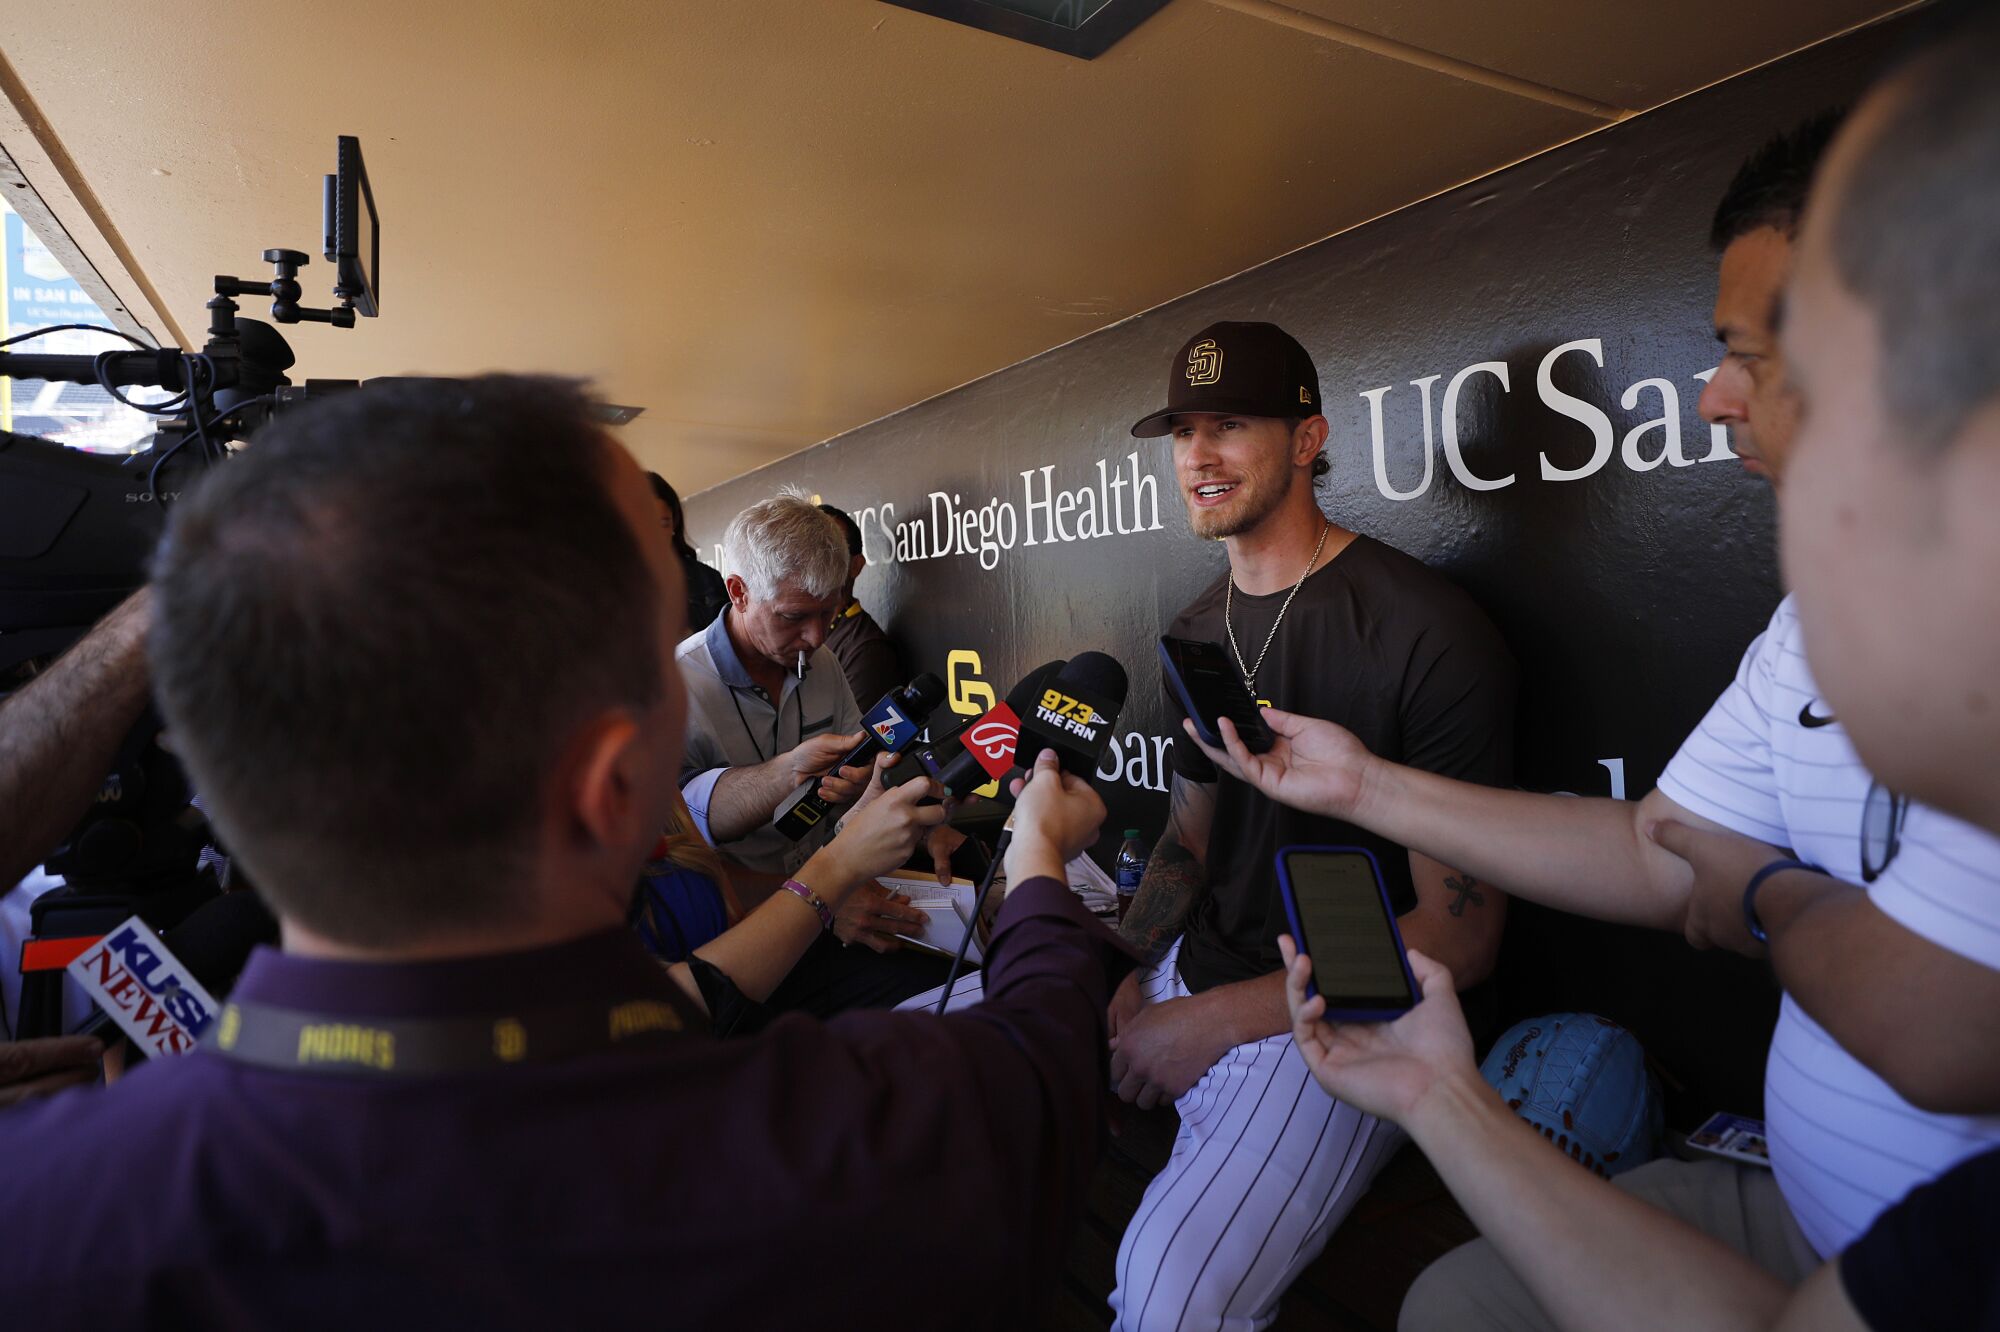 The Padres acquired closer Josh Hader from the Brewers, shown here talking with the media before a game on Tuesday morning.